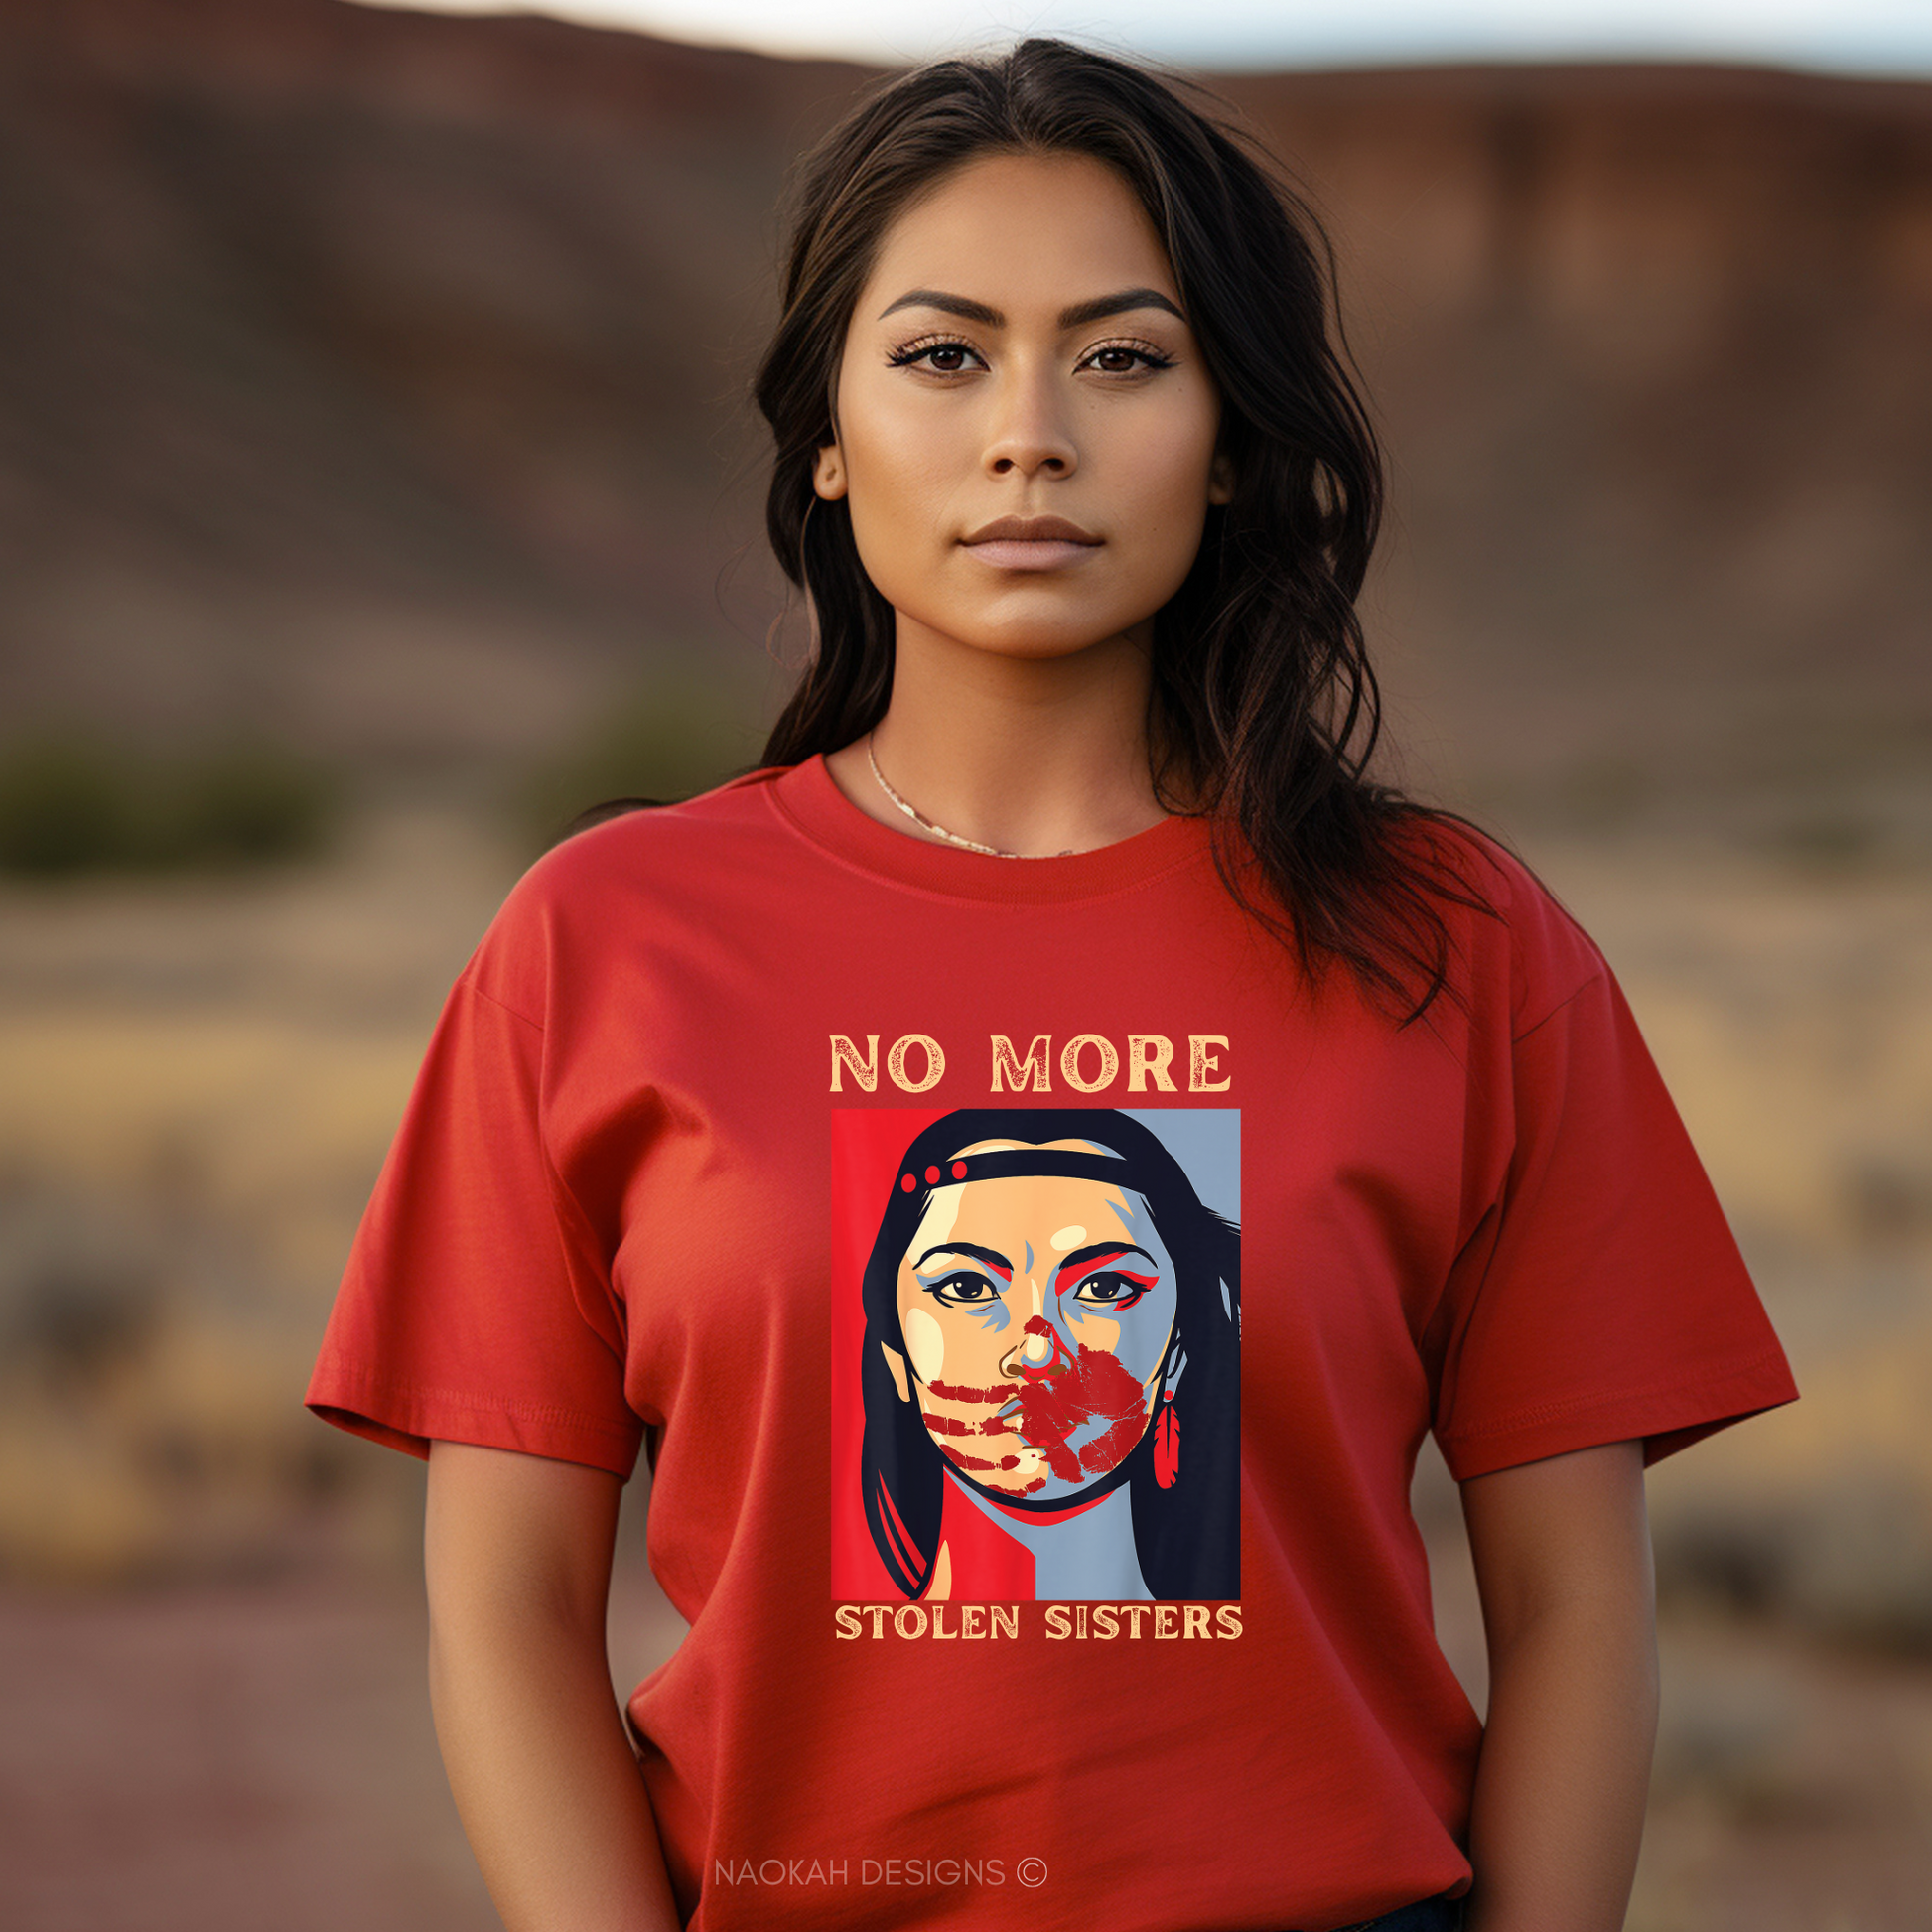 No more stolen sisters shirt, Missing and murdered Indigenous women shirt, MMIW shirt, I wear red for my sisters shirt, Indigenous owned shop